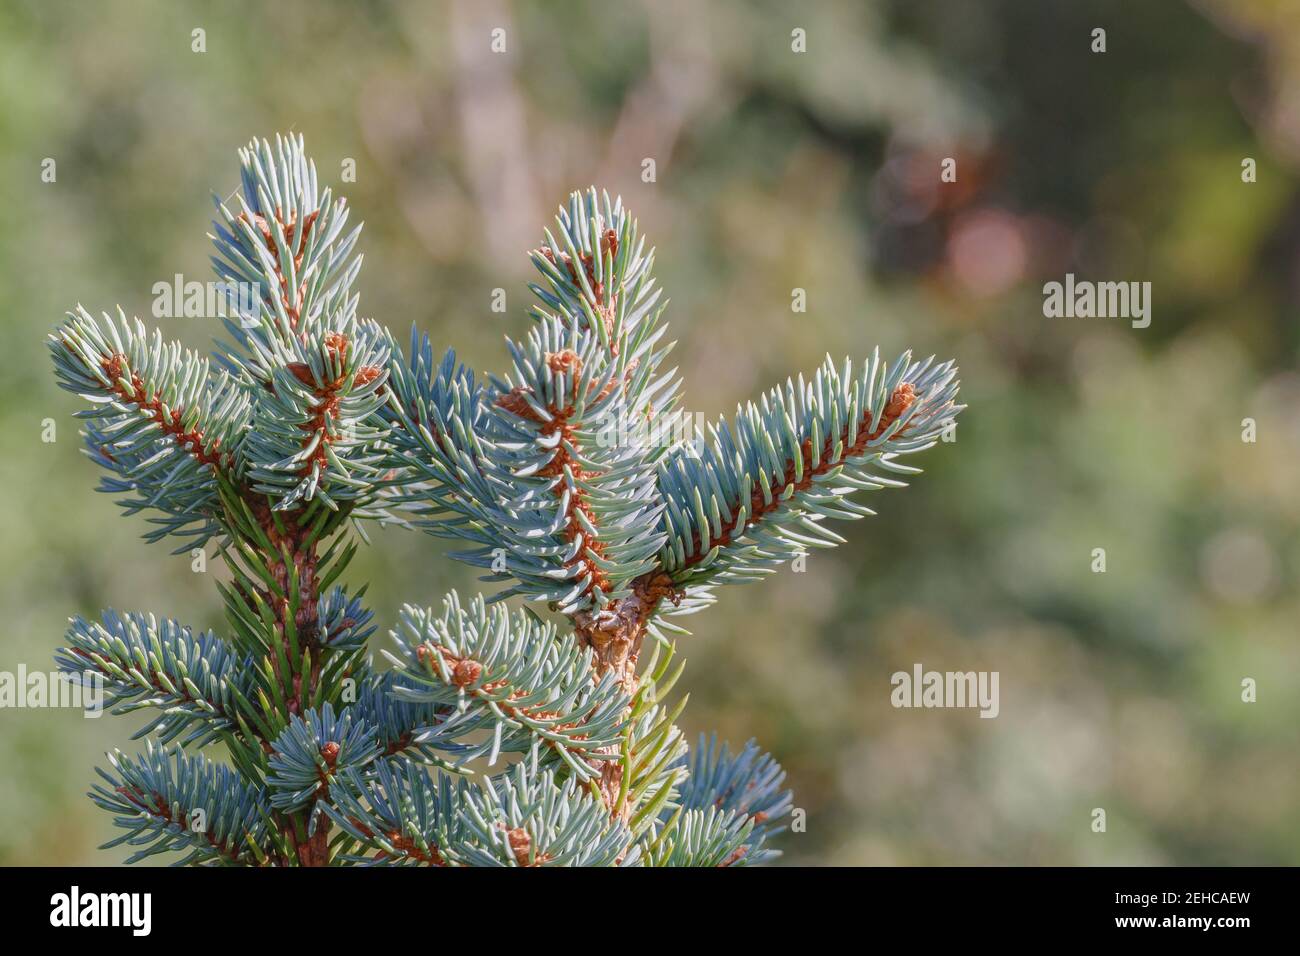 colorado spruce leaves from picea pungens tree Stock Photo